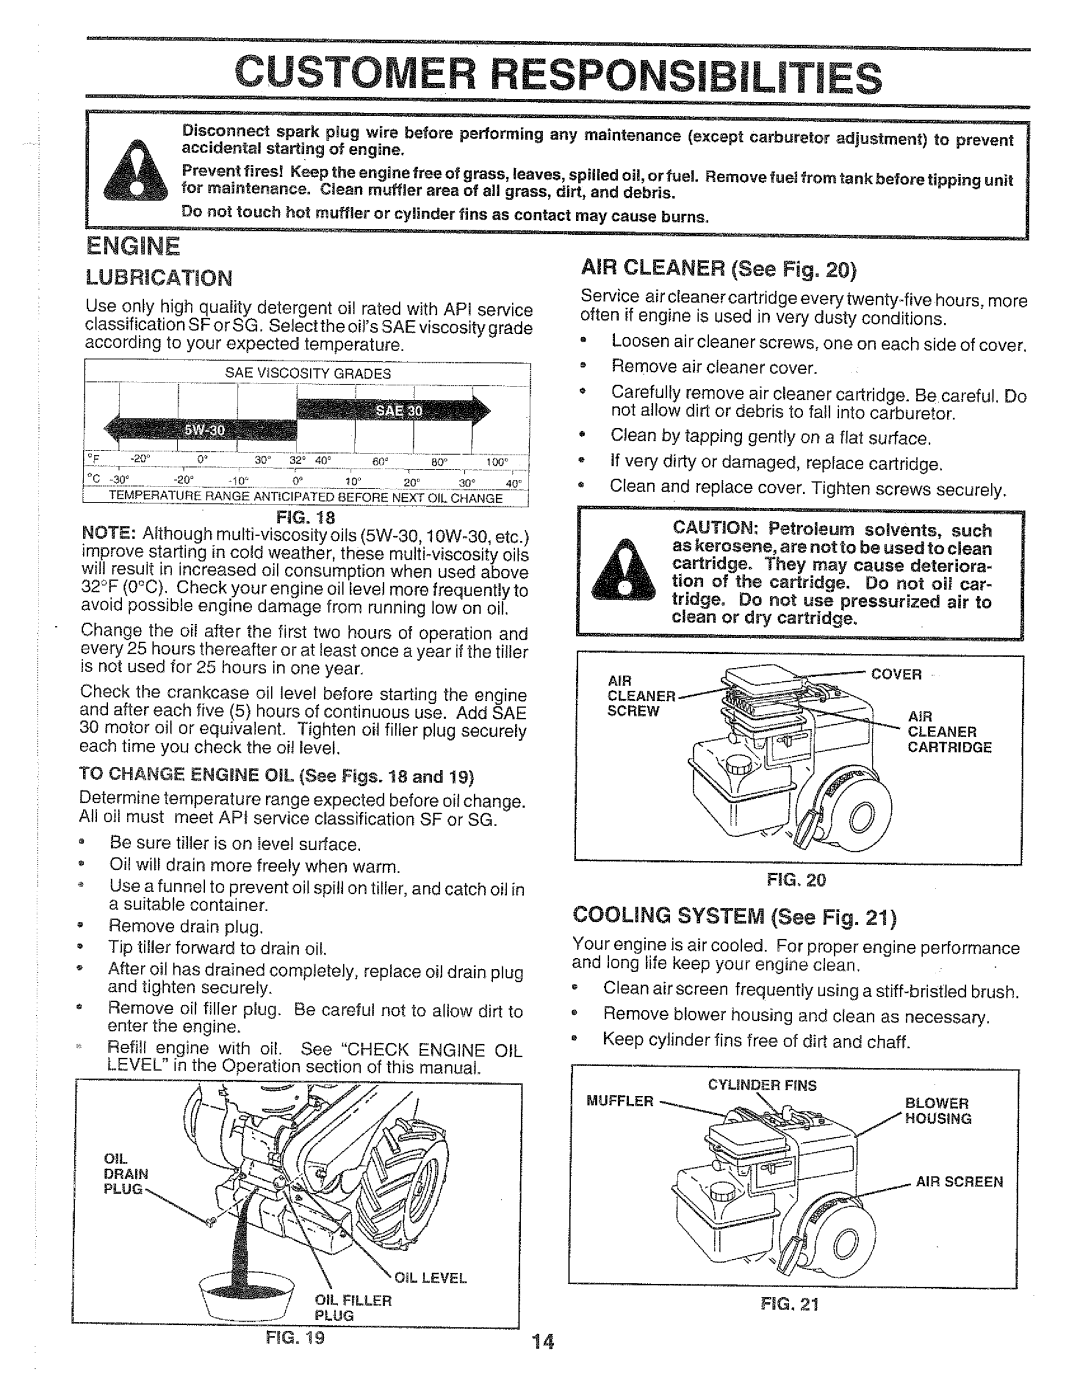 Weed Eater WER500E, 147331 manual 